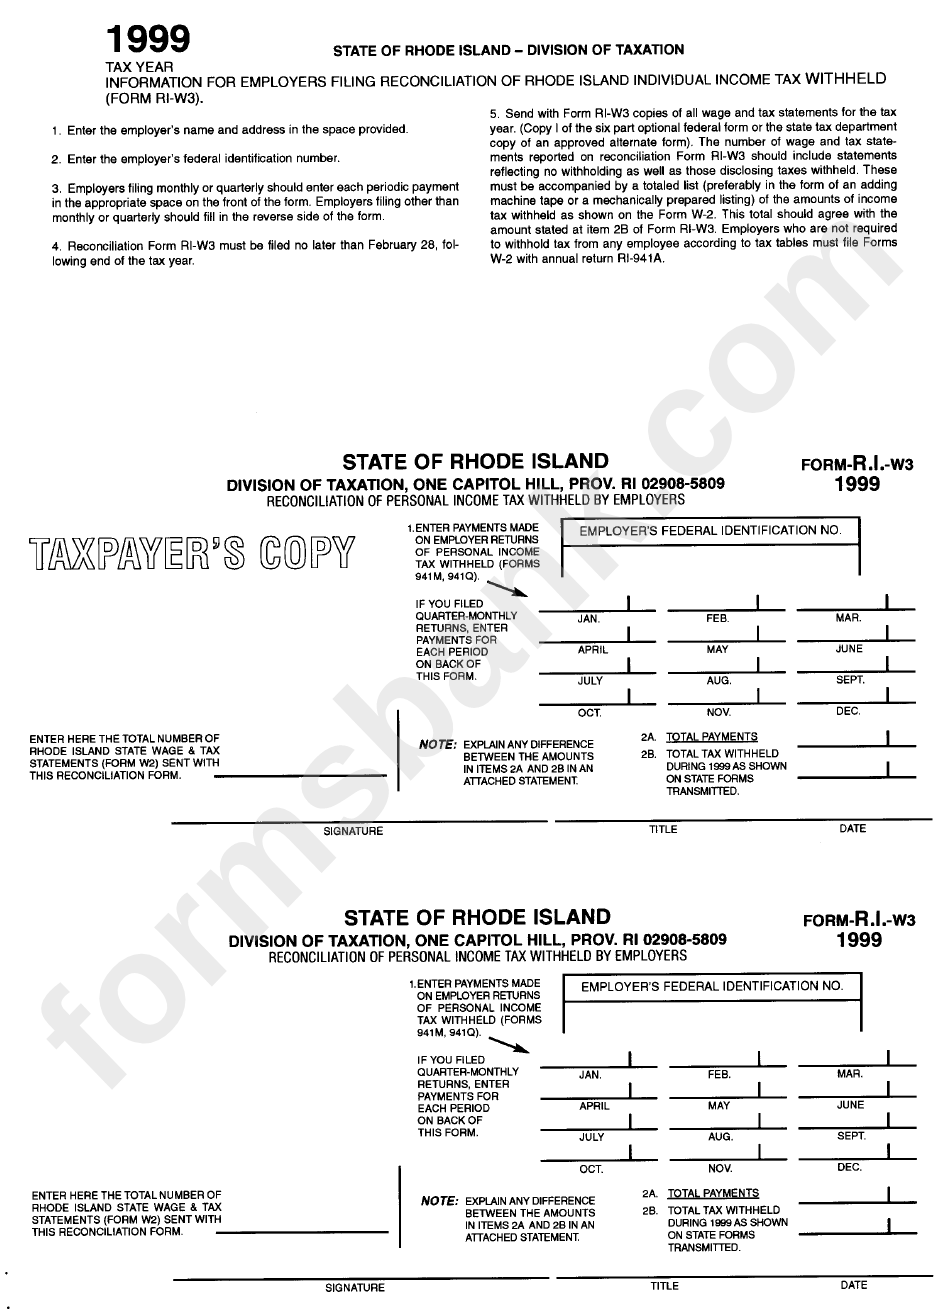 Form R.i.-W3 - Reconciliation Of Personal Income Tax Withheld By Employers - 1999